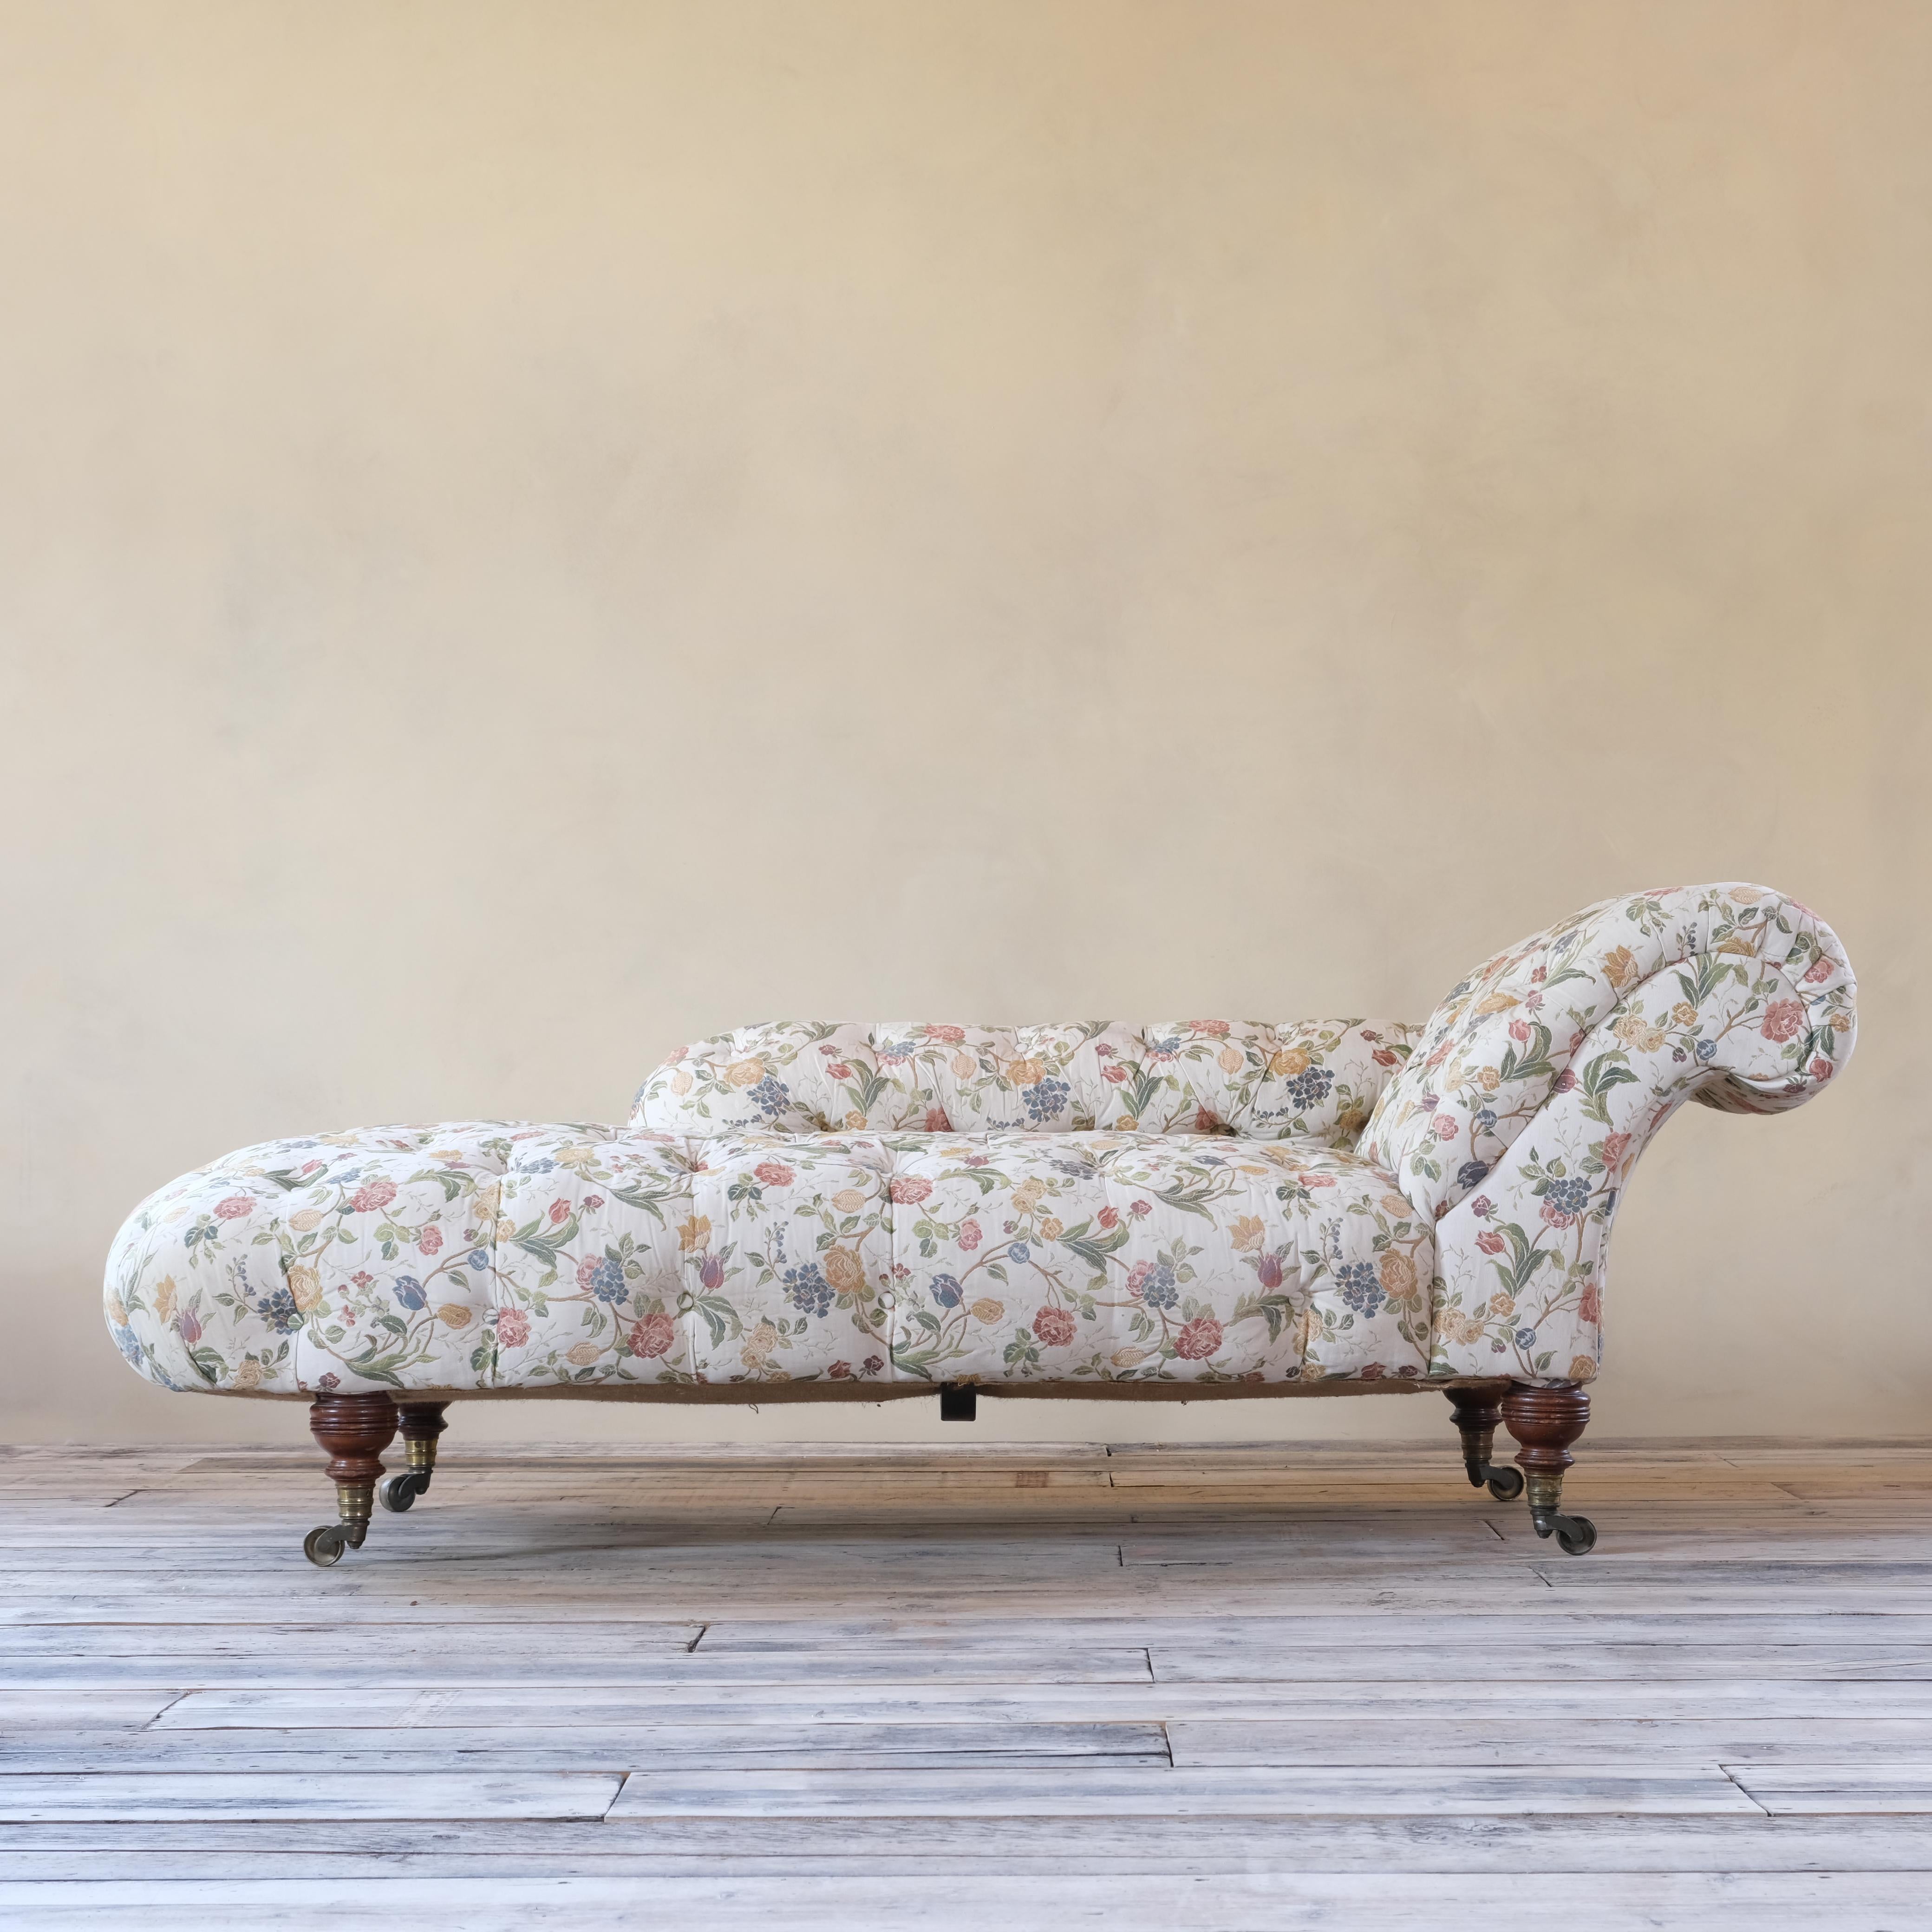 A 19th century chaise lounge by Howard and sons - London. Large in scale and raised on 4 beautifully turned walnut legs with all 4 original H&S stamped ring turned gilt brass casters. 

As the upholstery is in good clean condition I have decided